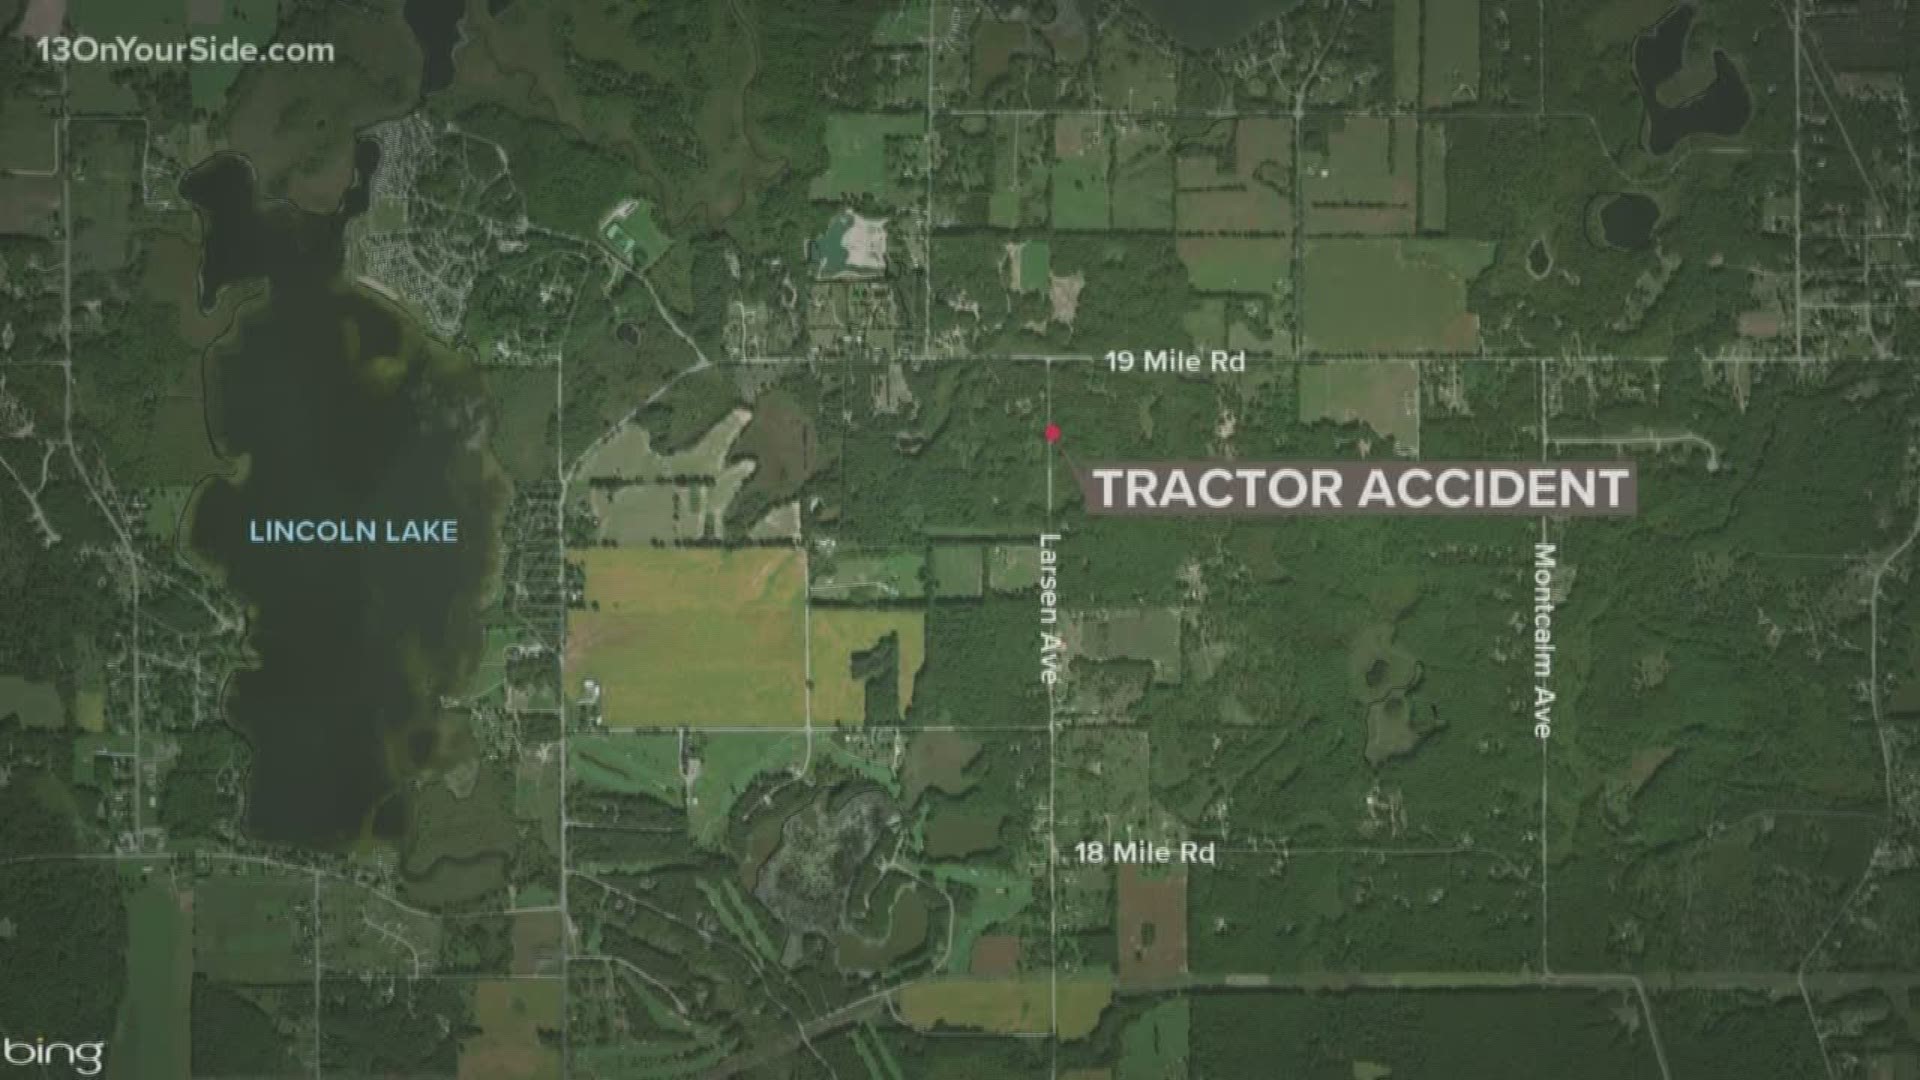 A man was injured in a tractor accident in northern Kent County Tuesday evening. The man was airlifted to the hospital. His condition is unknown at this time.